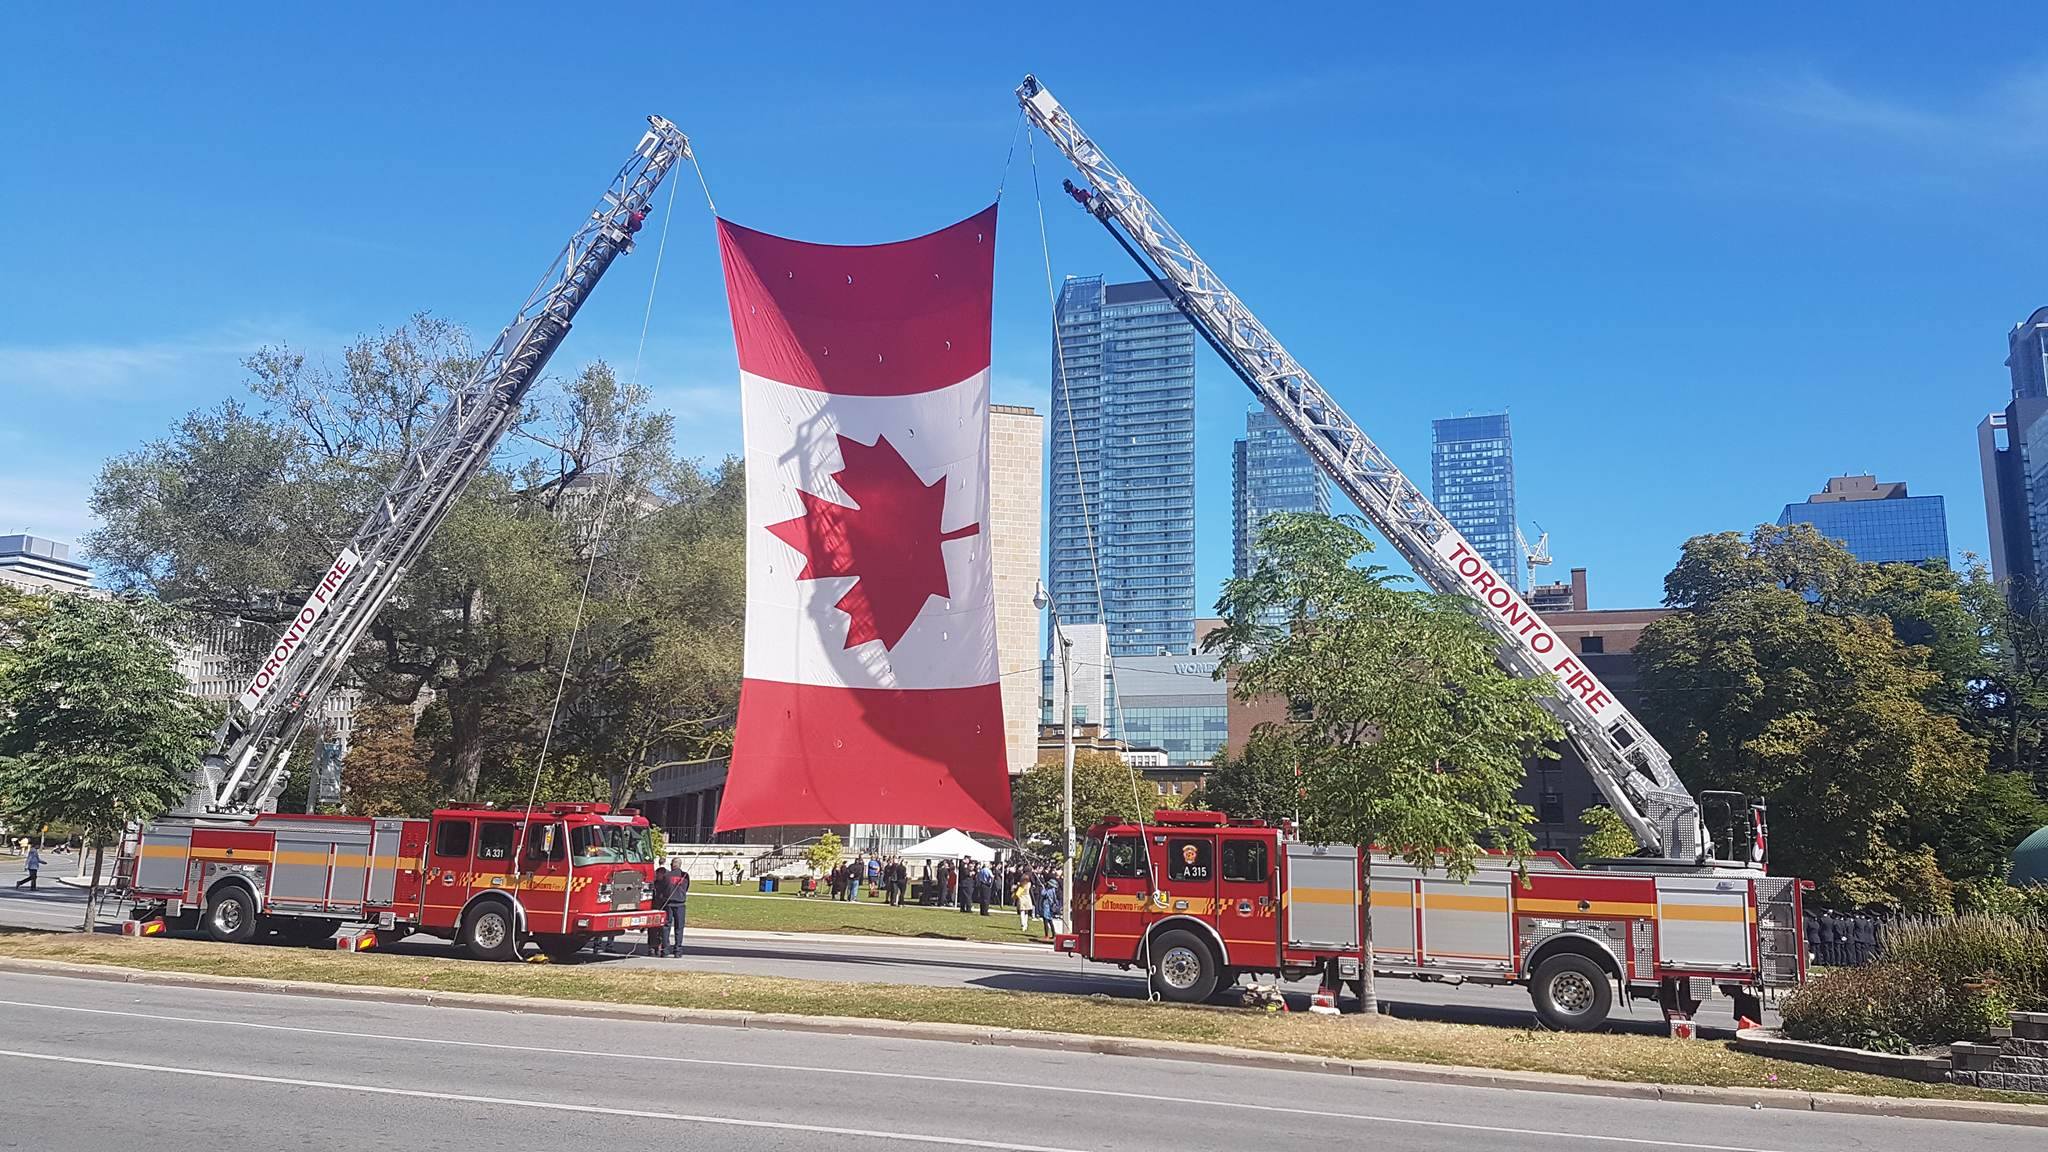 Fallen fire Fighters Remembered in Toronto